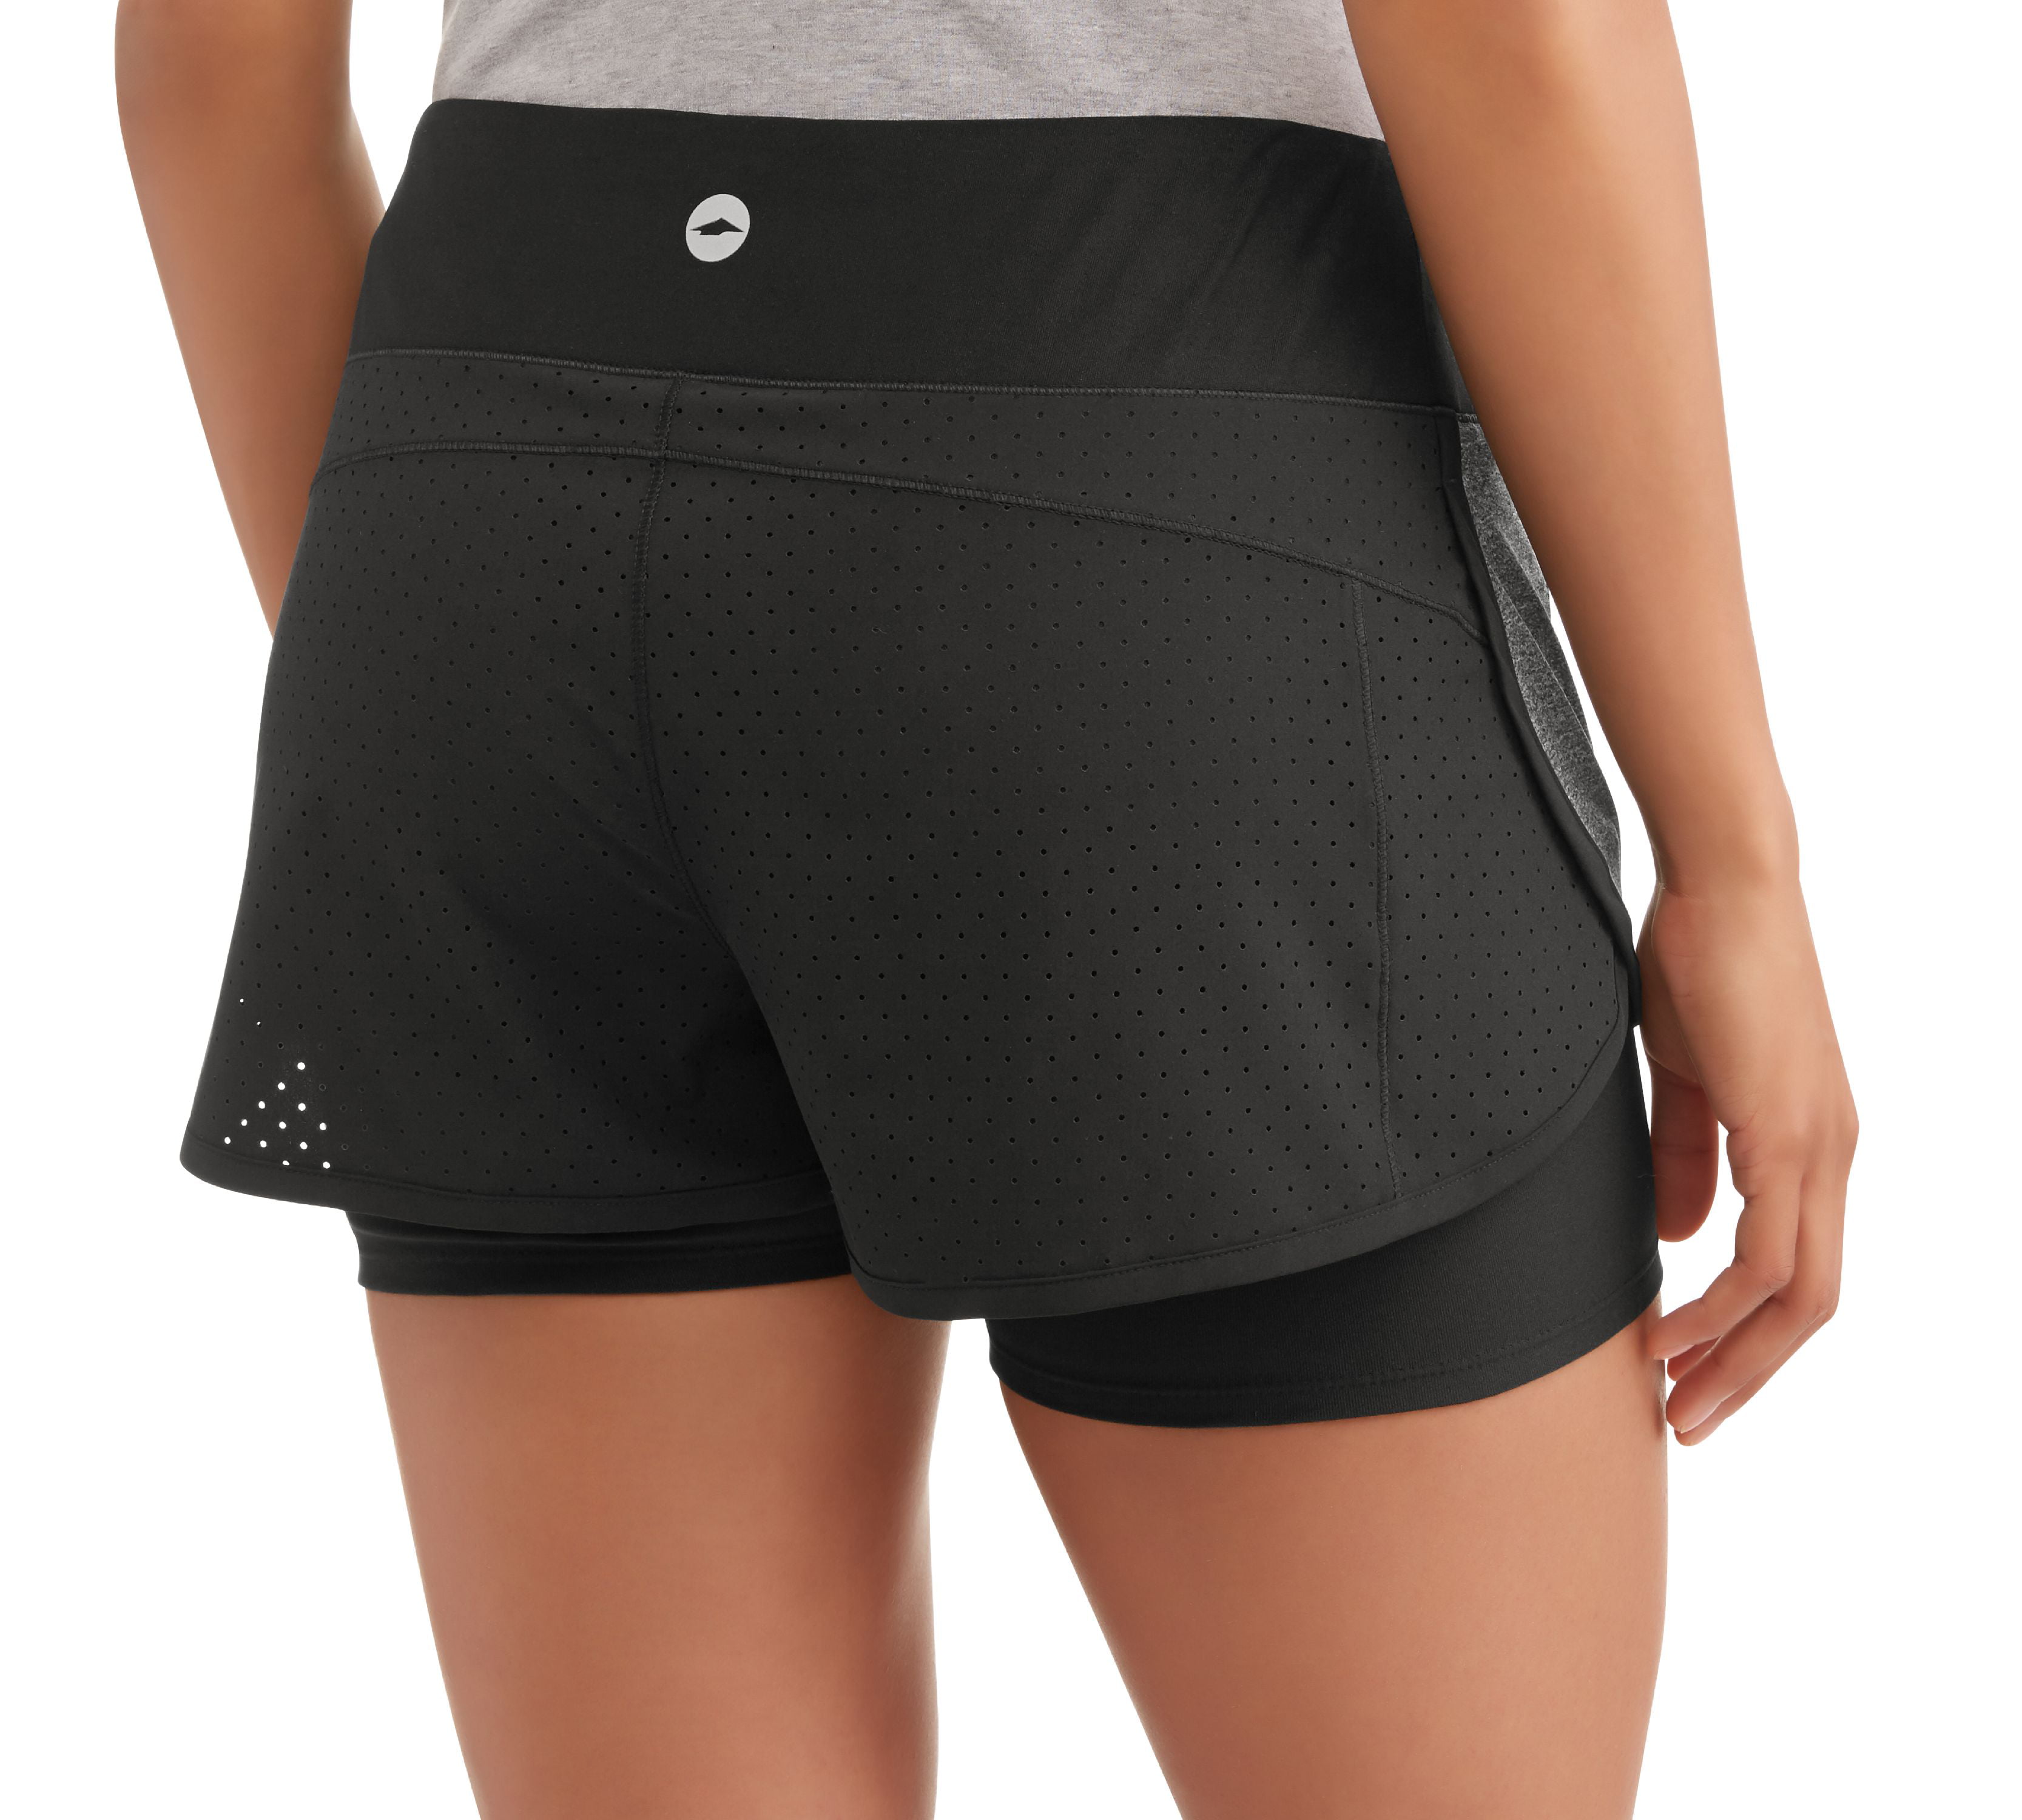 Women's Active Perforated Running Shorts With Built-In Compression Shorts 